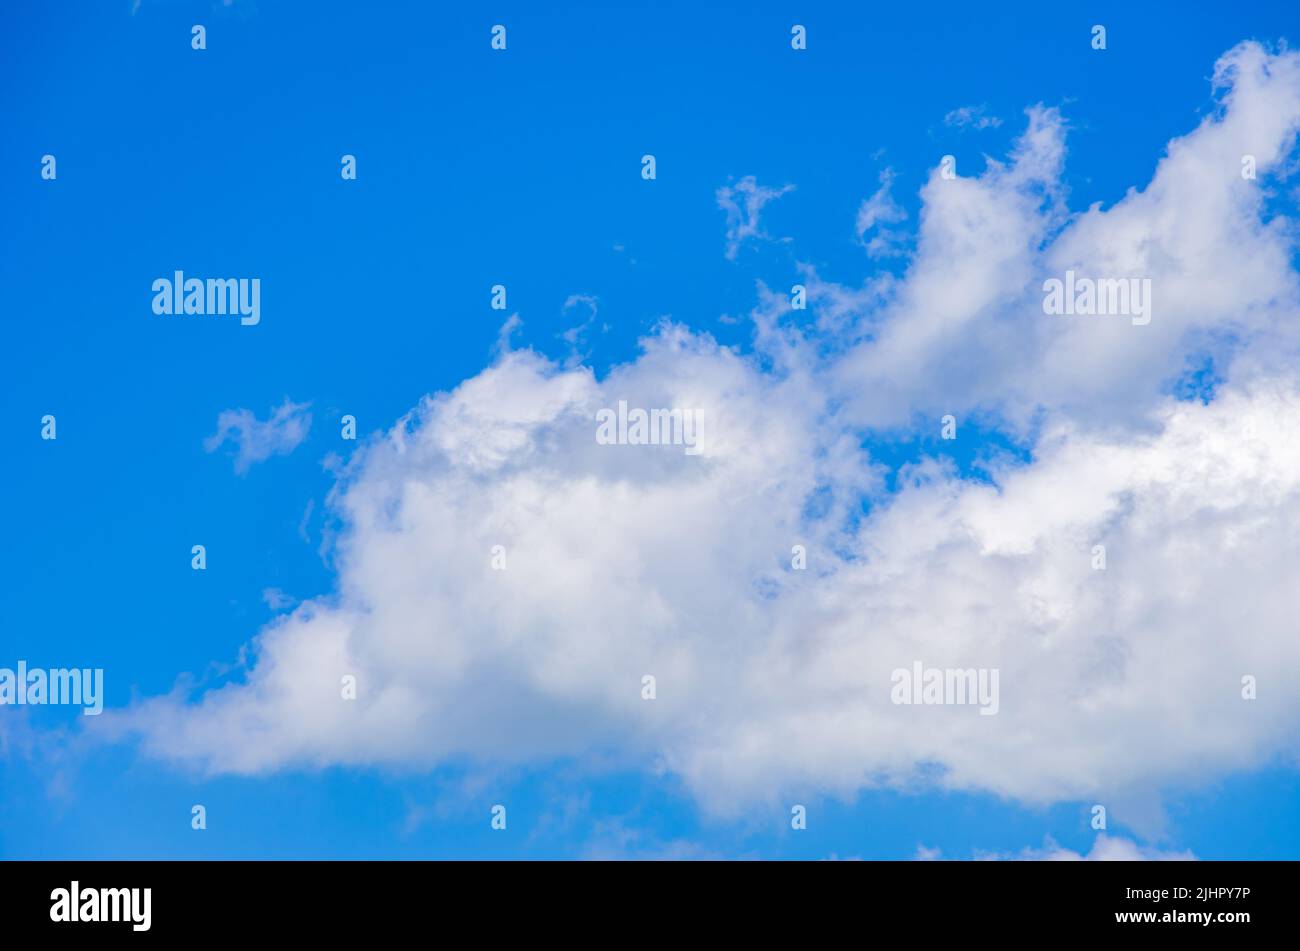 Background of cloud formations against a blue sky. Stock Photo